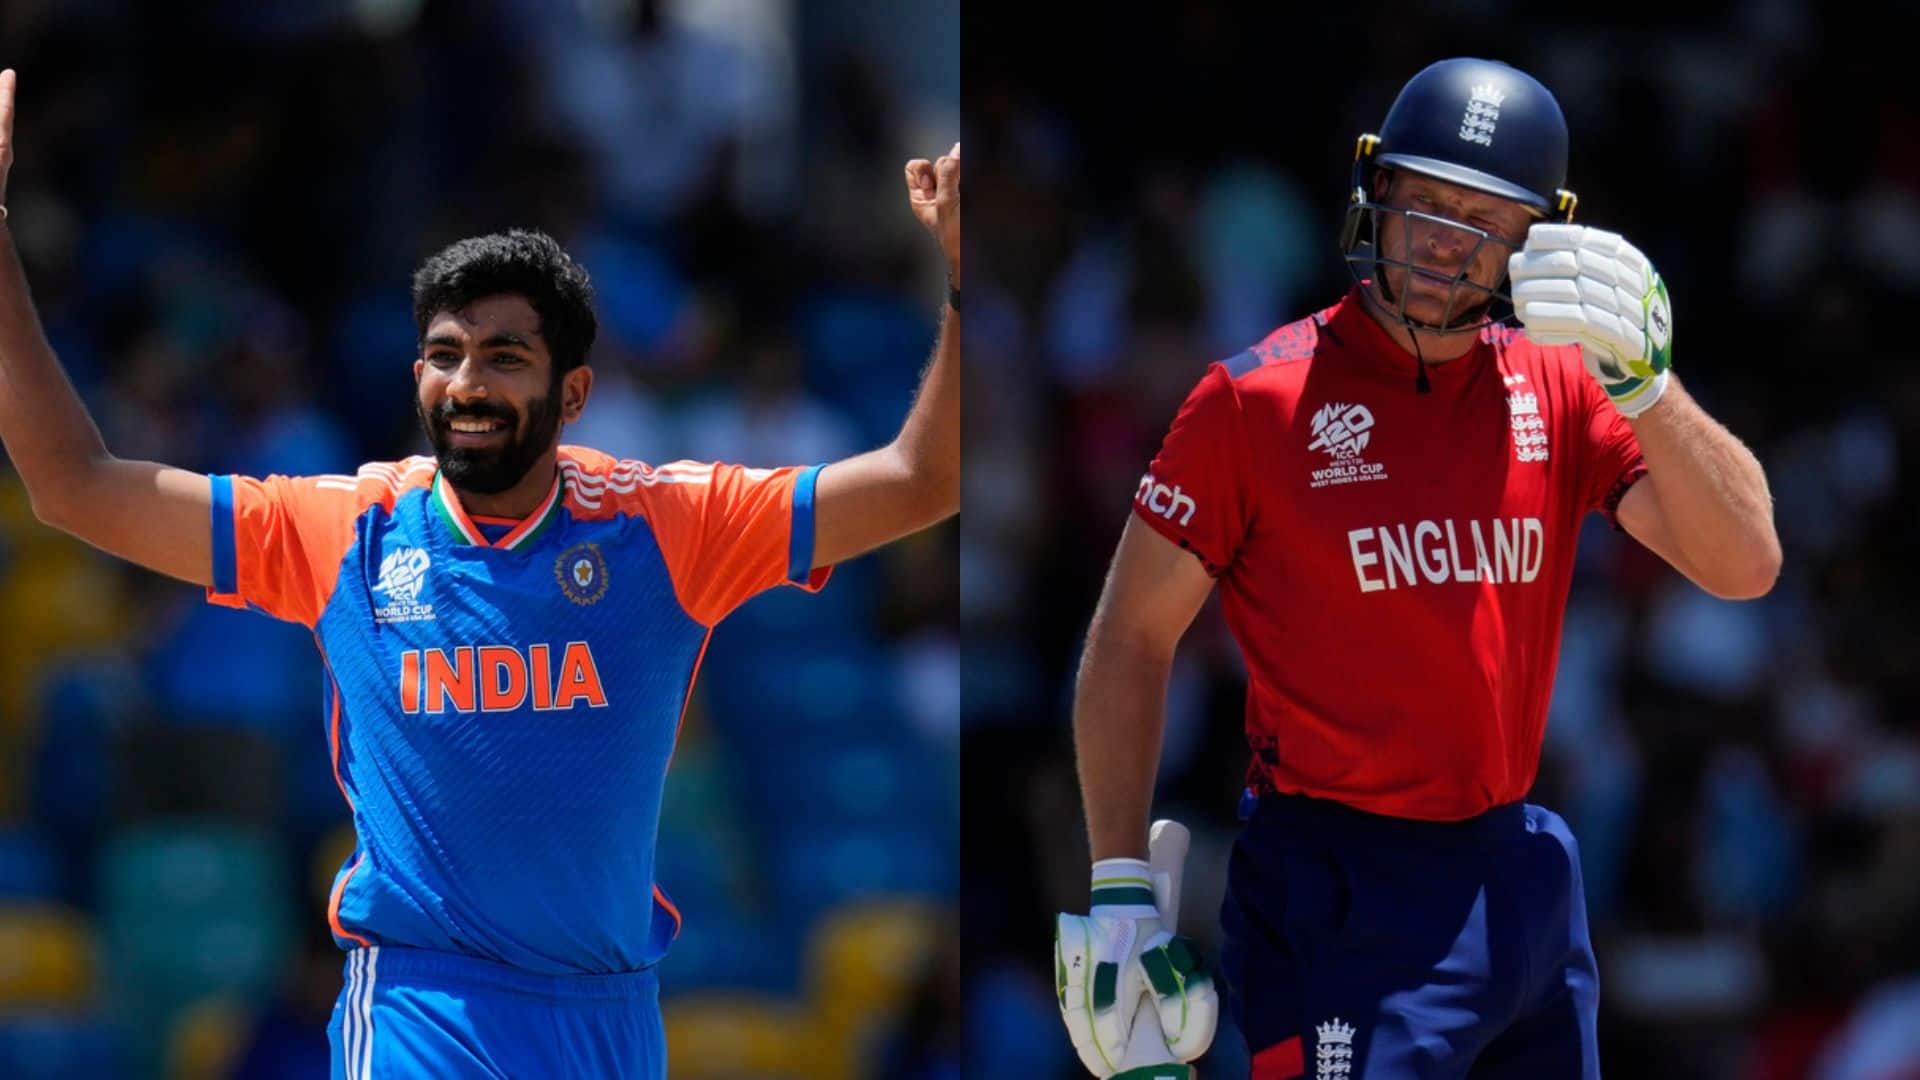 Bumrah To Dismiss Buttler, 'This' Bowler To Get Kohli? 5 Player Battles For IND vs ENG T20 WC Semifinal